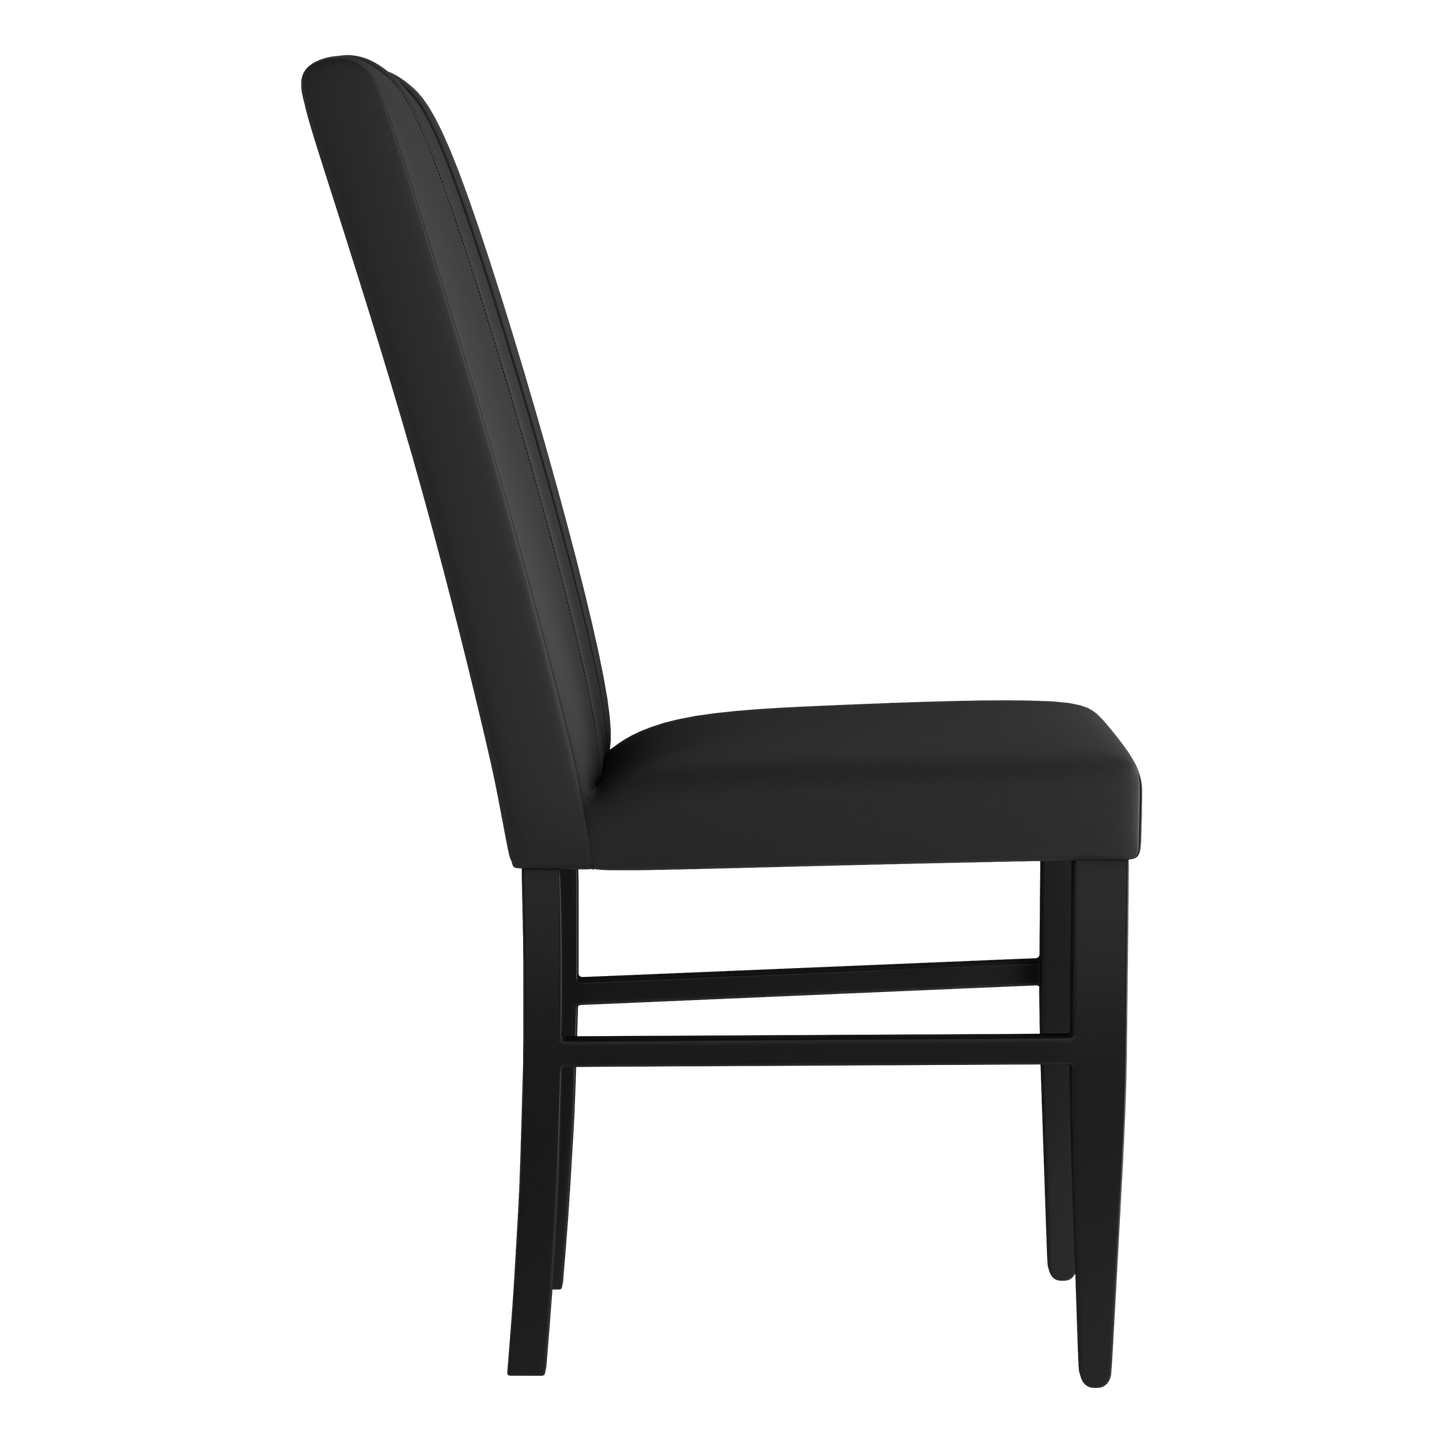 Side Chair 2000 with U Sports Gaming Logo Set of 2